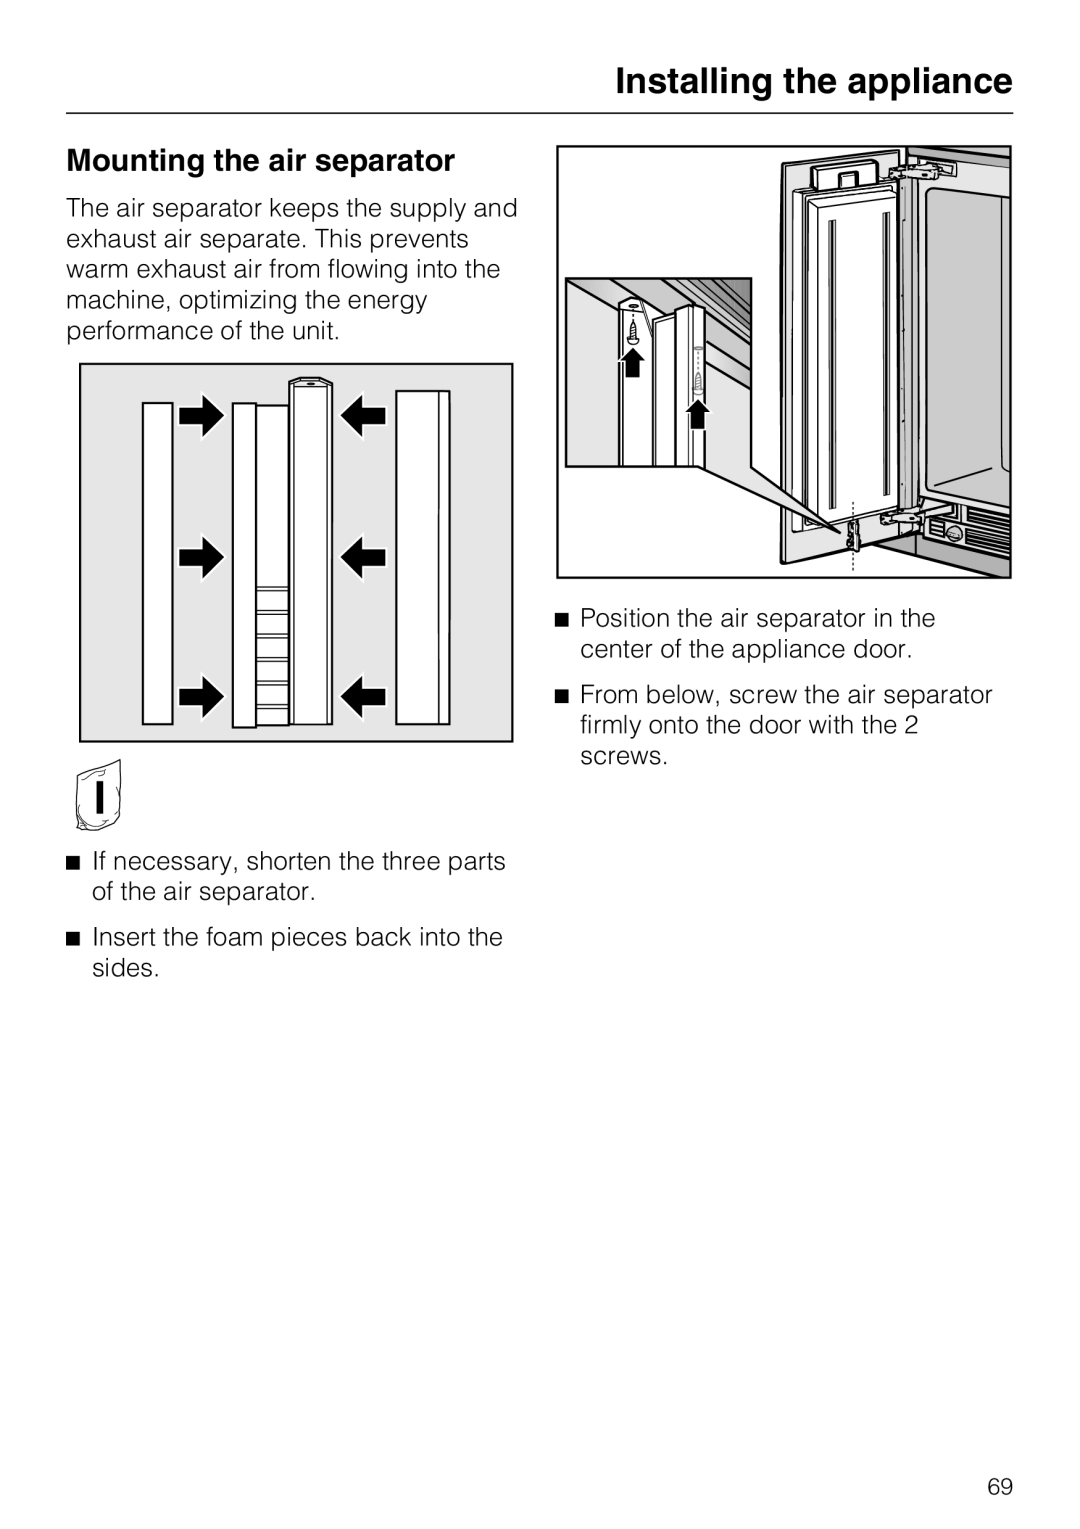 Miele F 1411 Vi installation instructions Mounting the air separator, Installing the appliance 